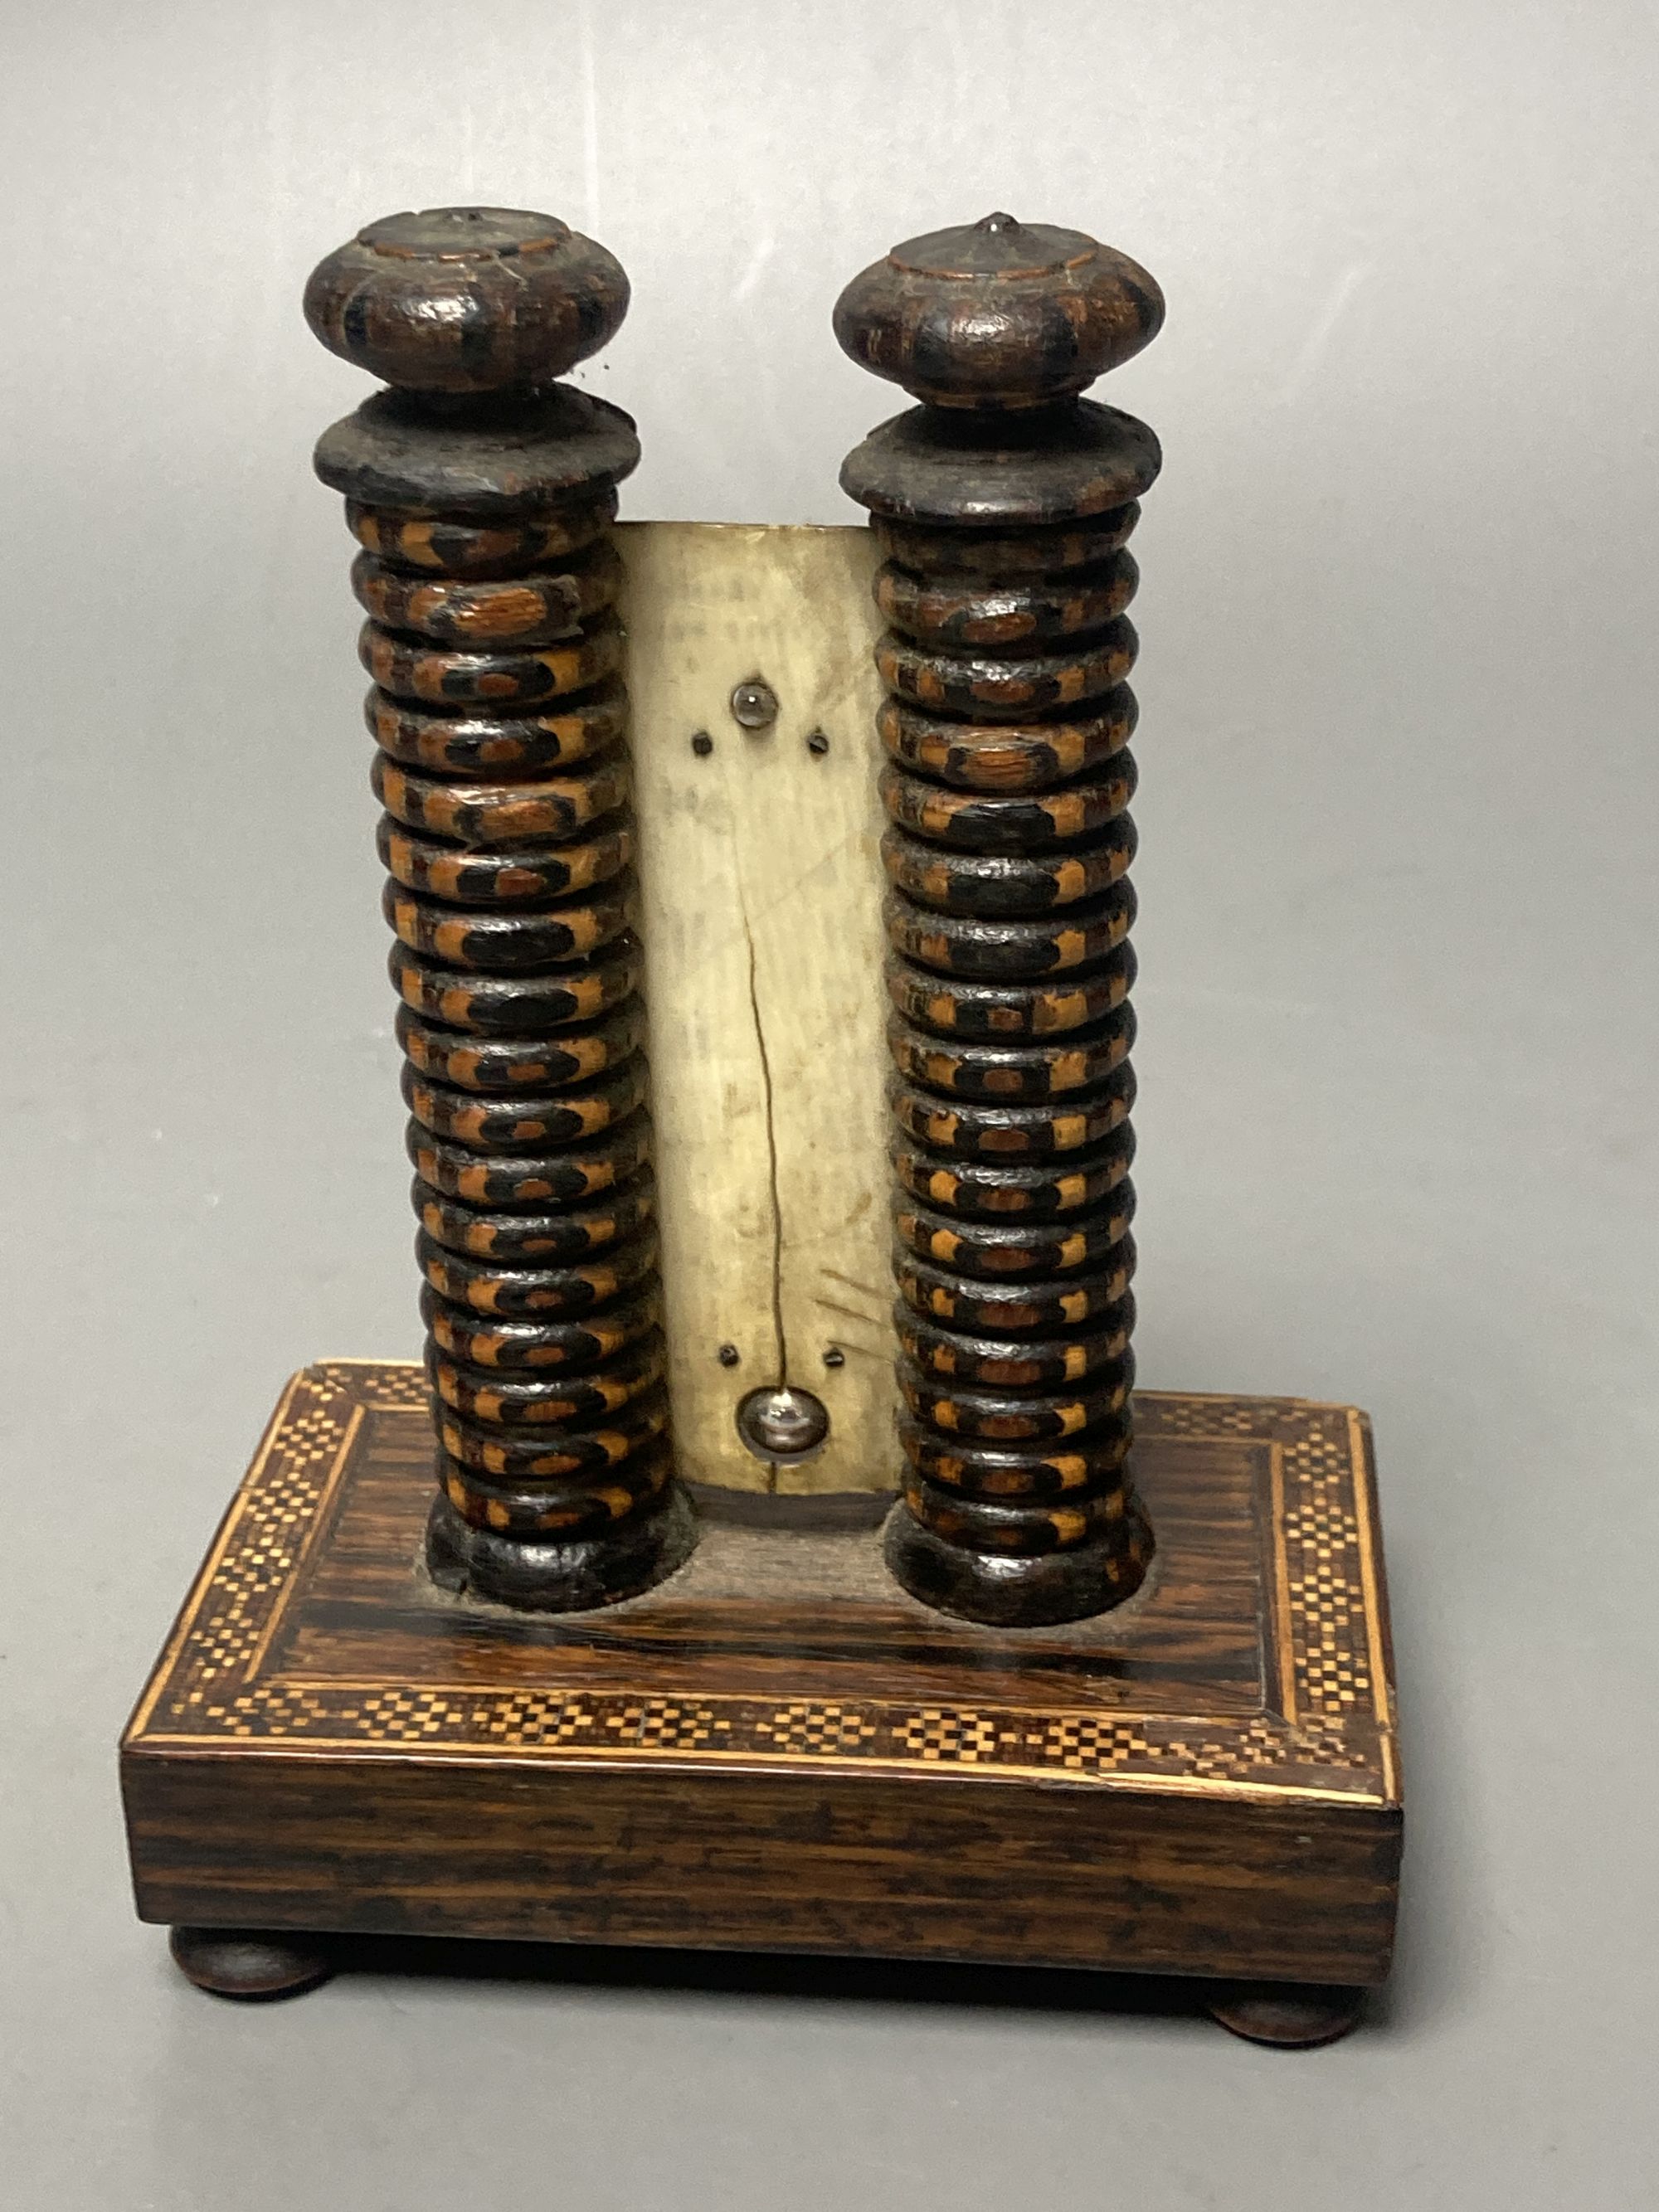 A Tunbridge ware rosewood stickware and tesserae mosaic twin tower thermometer by Henry Hollamby, 12.5cm